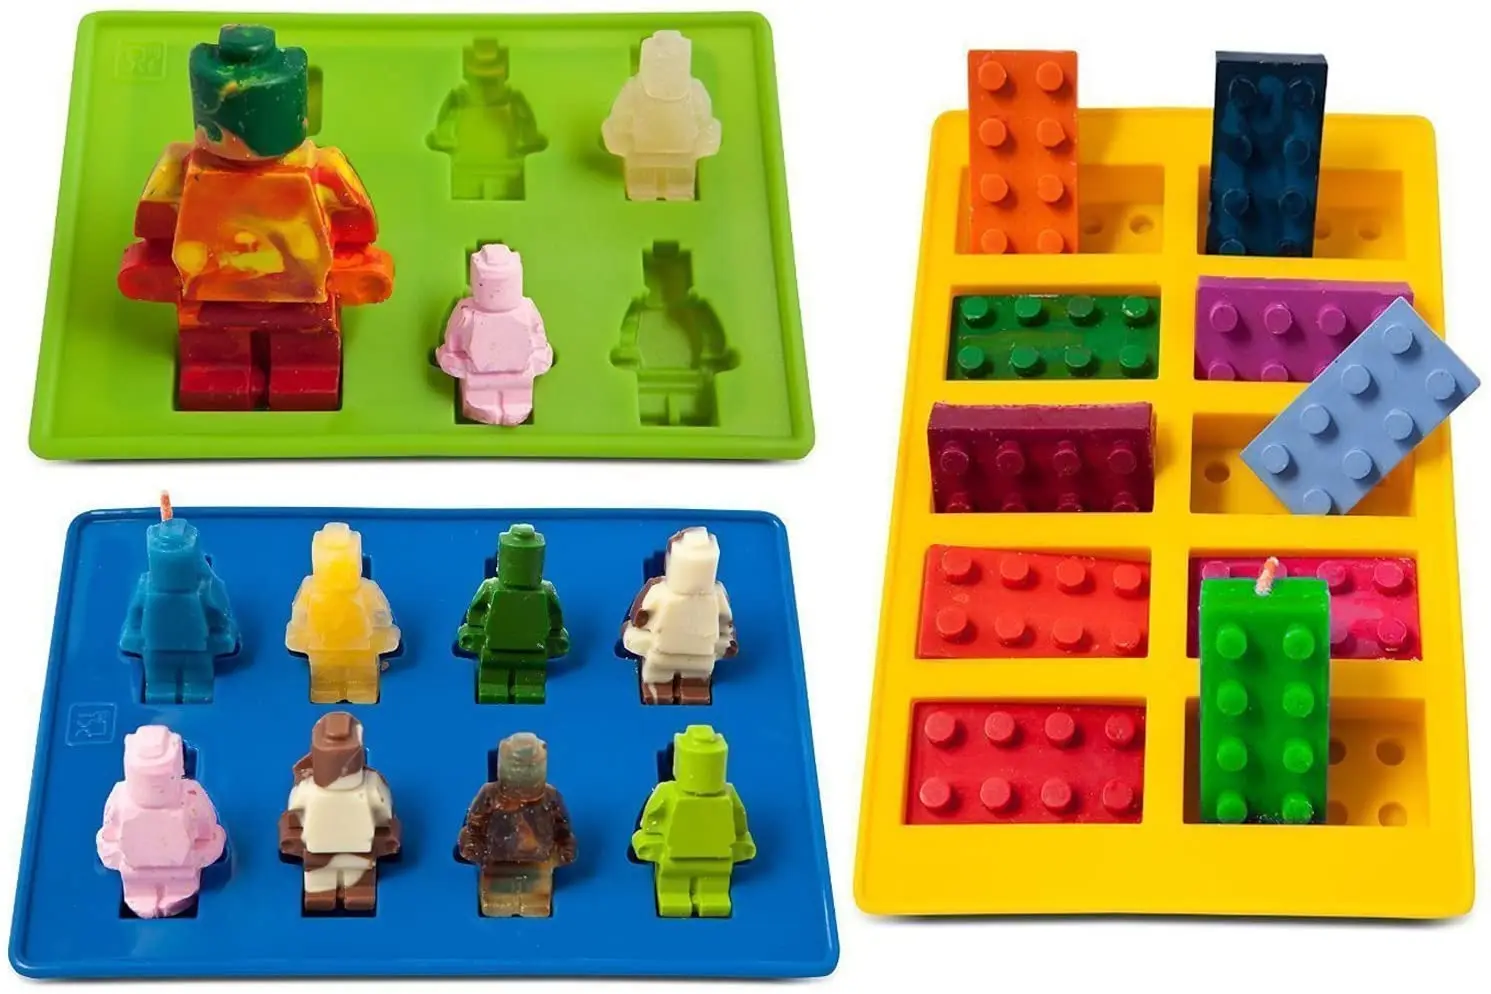 Silicone Lego Candy Molds for Awesome Desserts